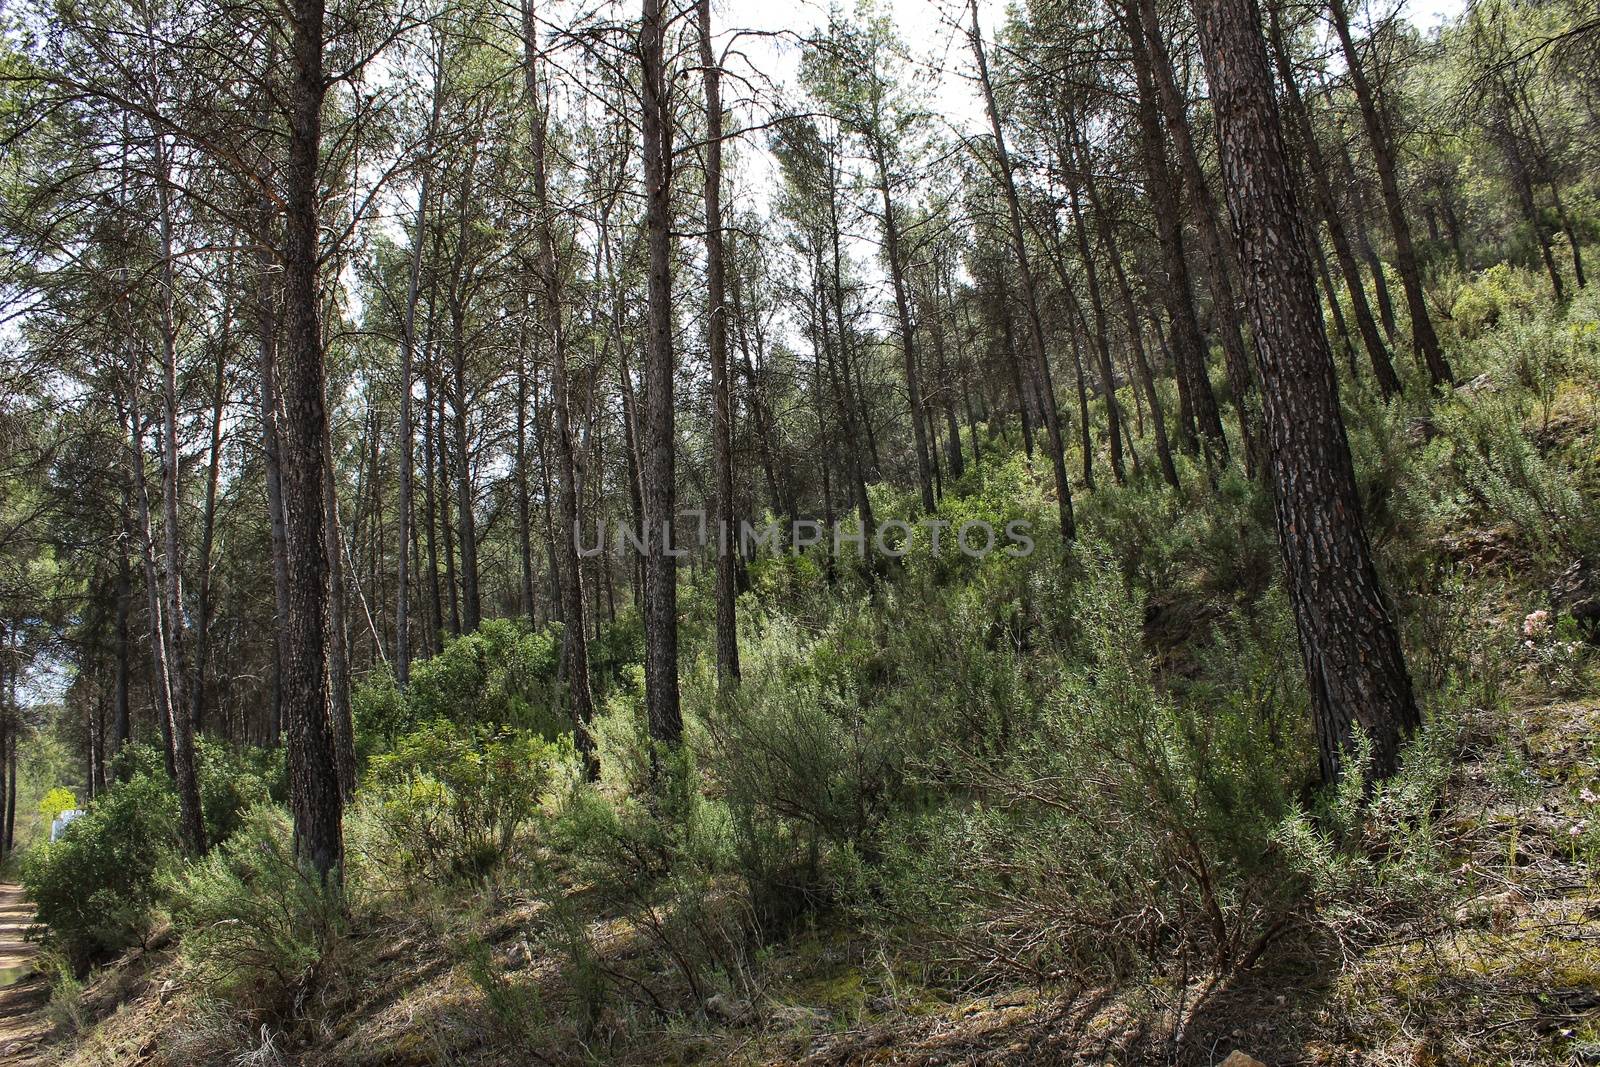 Pine forest in the mountains of Castilla La Mancha, Spain